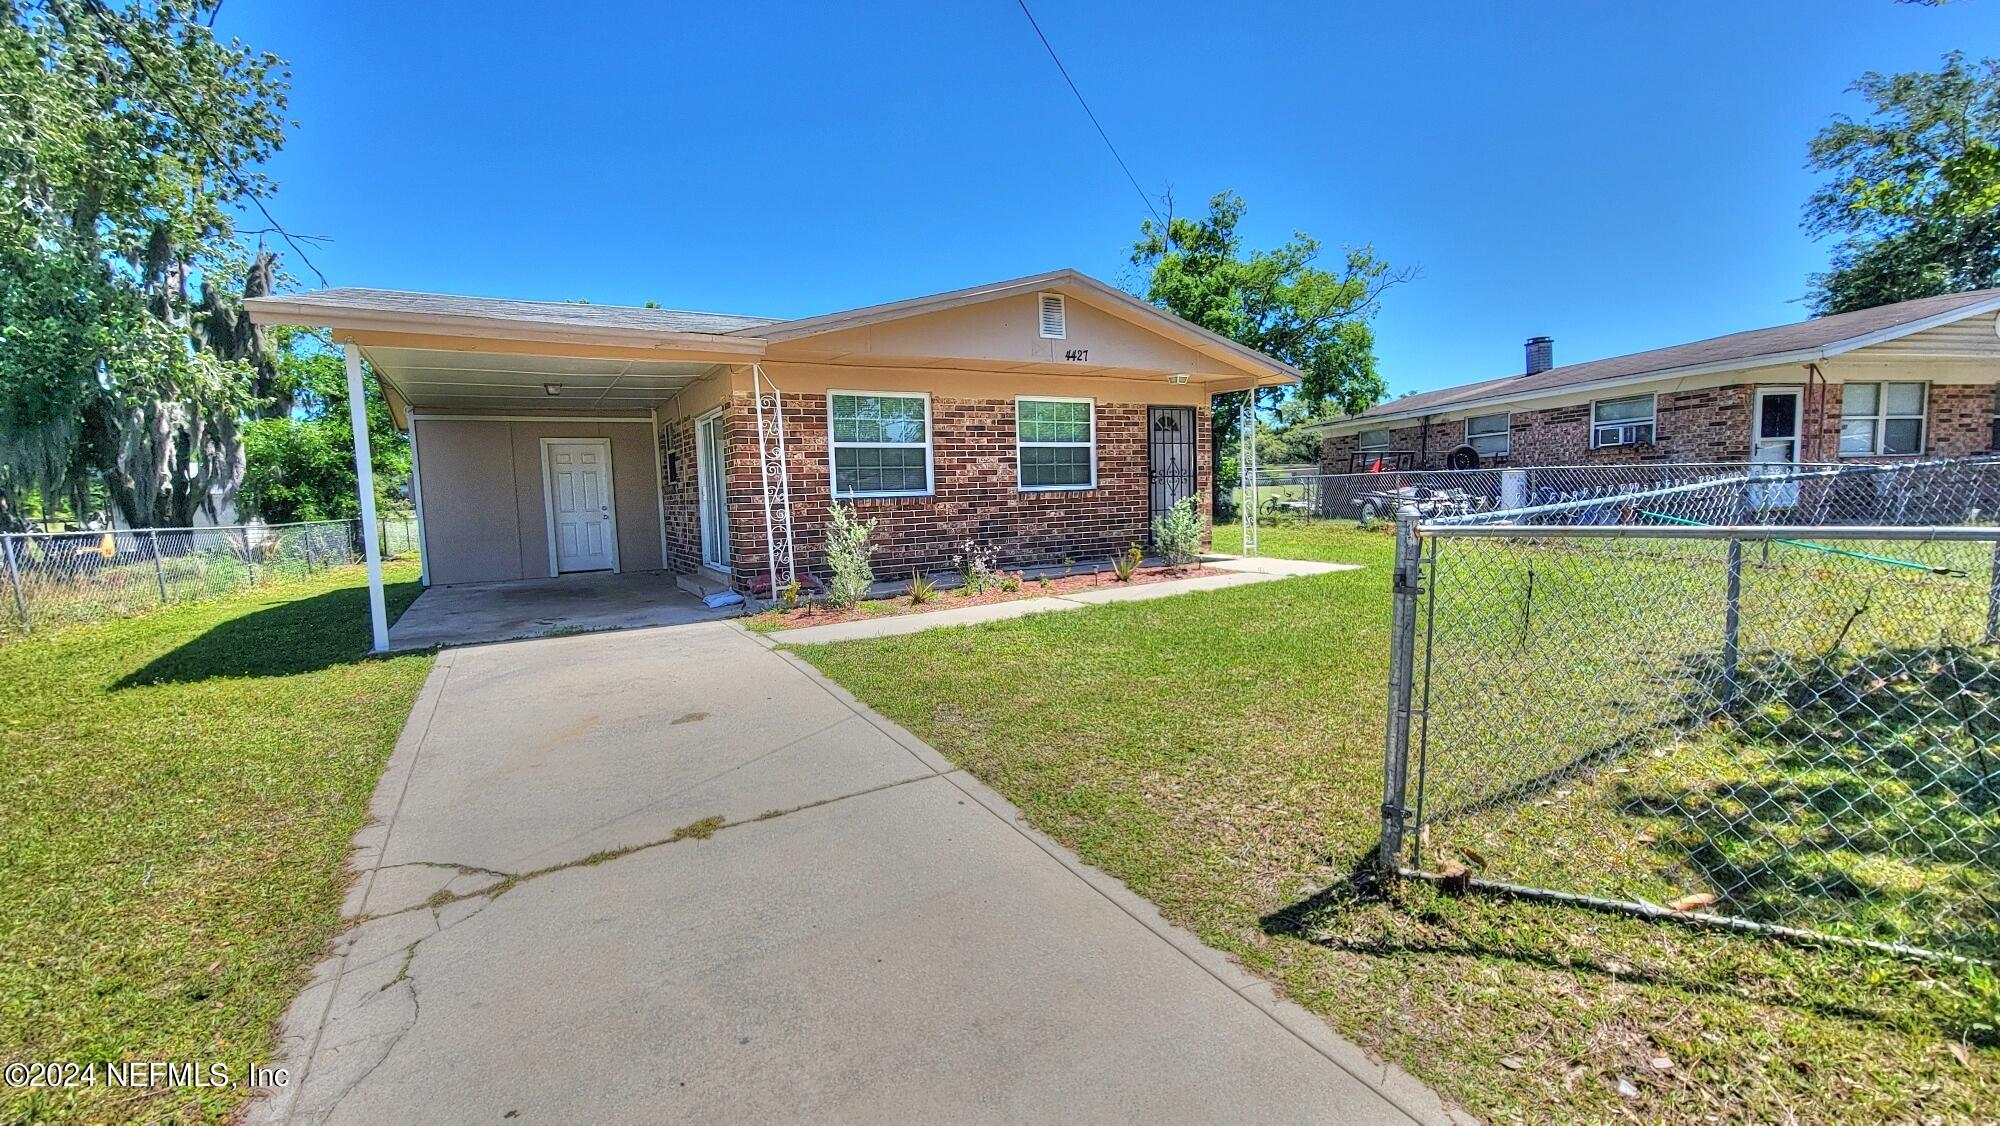 Jacksonville, FL home for sale located at 4427 Bessie Circle E, Jacksonville, FL 32209